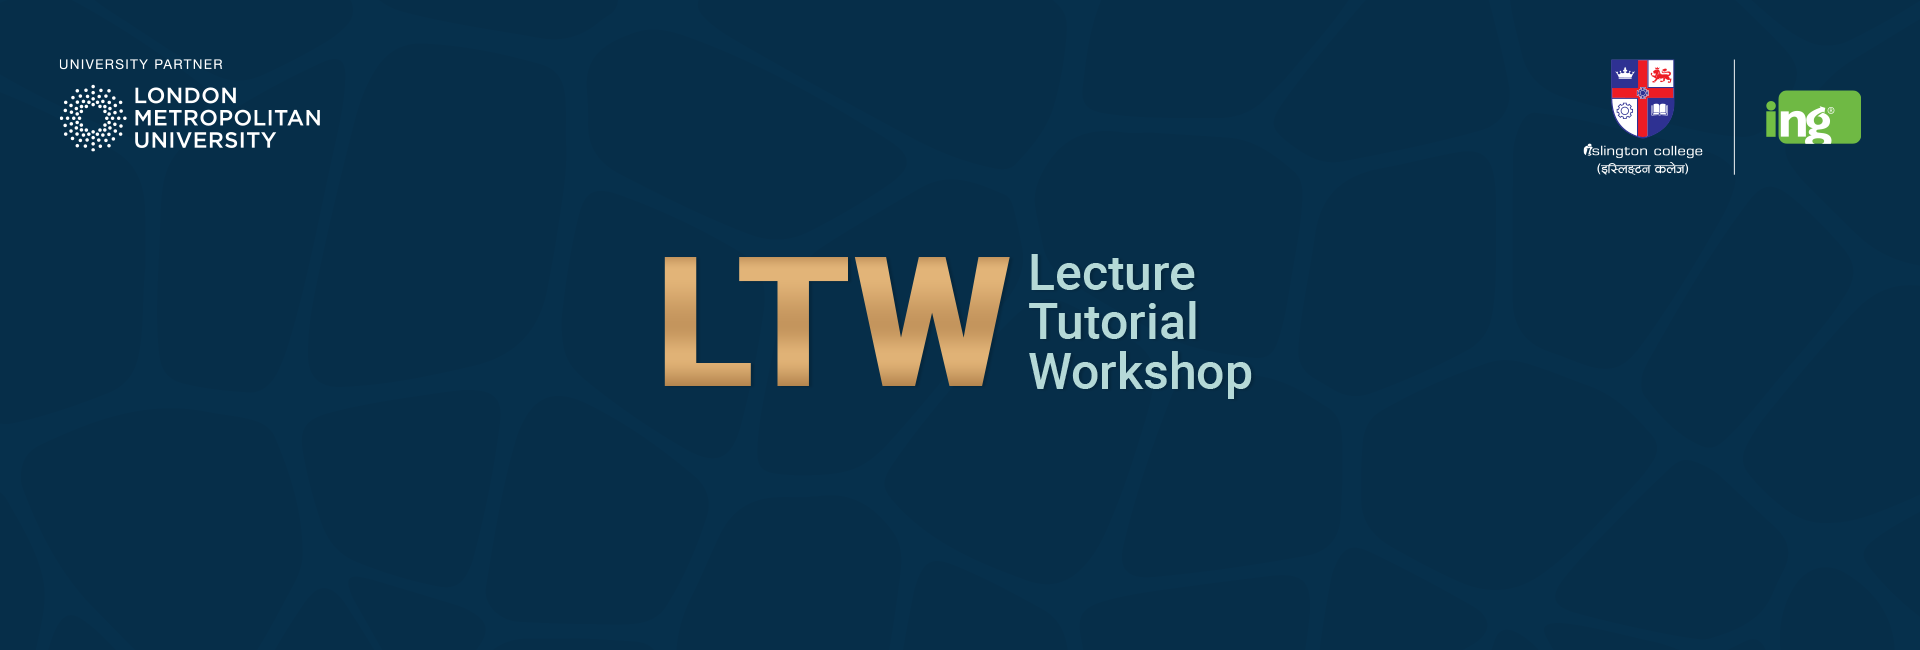 LTW (Lecture, Tutorial and Workshop)